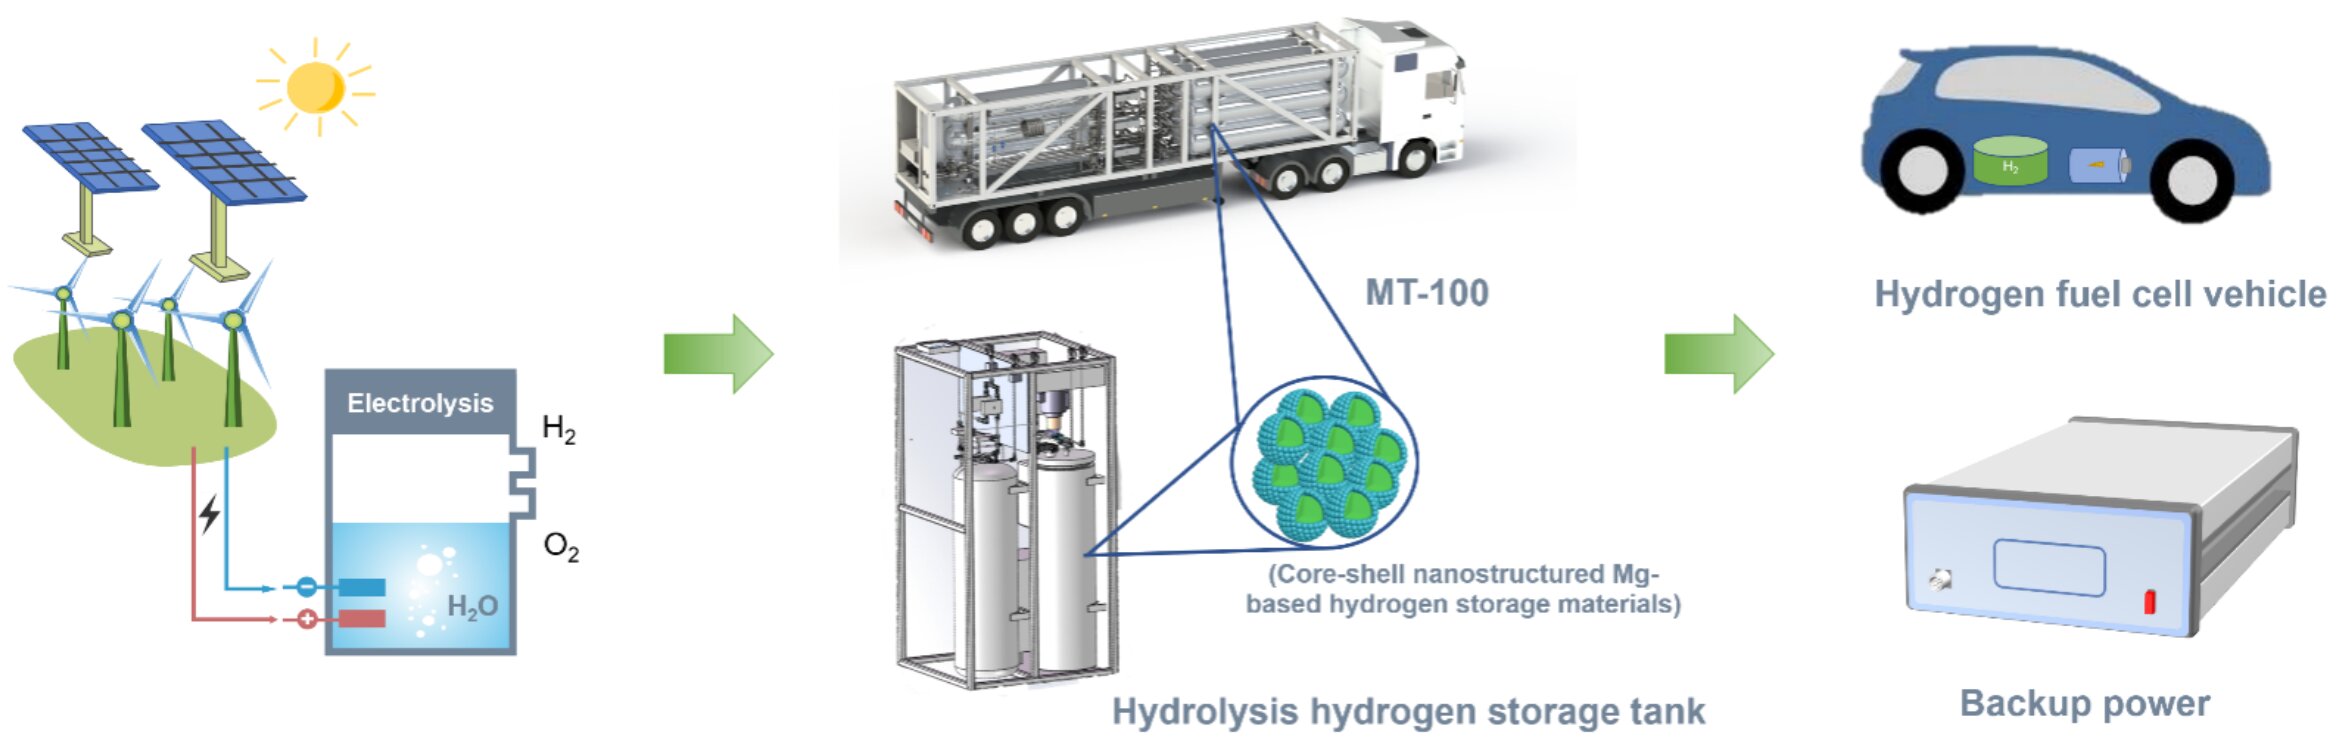 Exploring advanced magnesium-based hydrogen storage materials and their applications